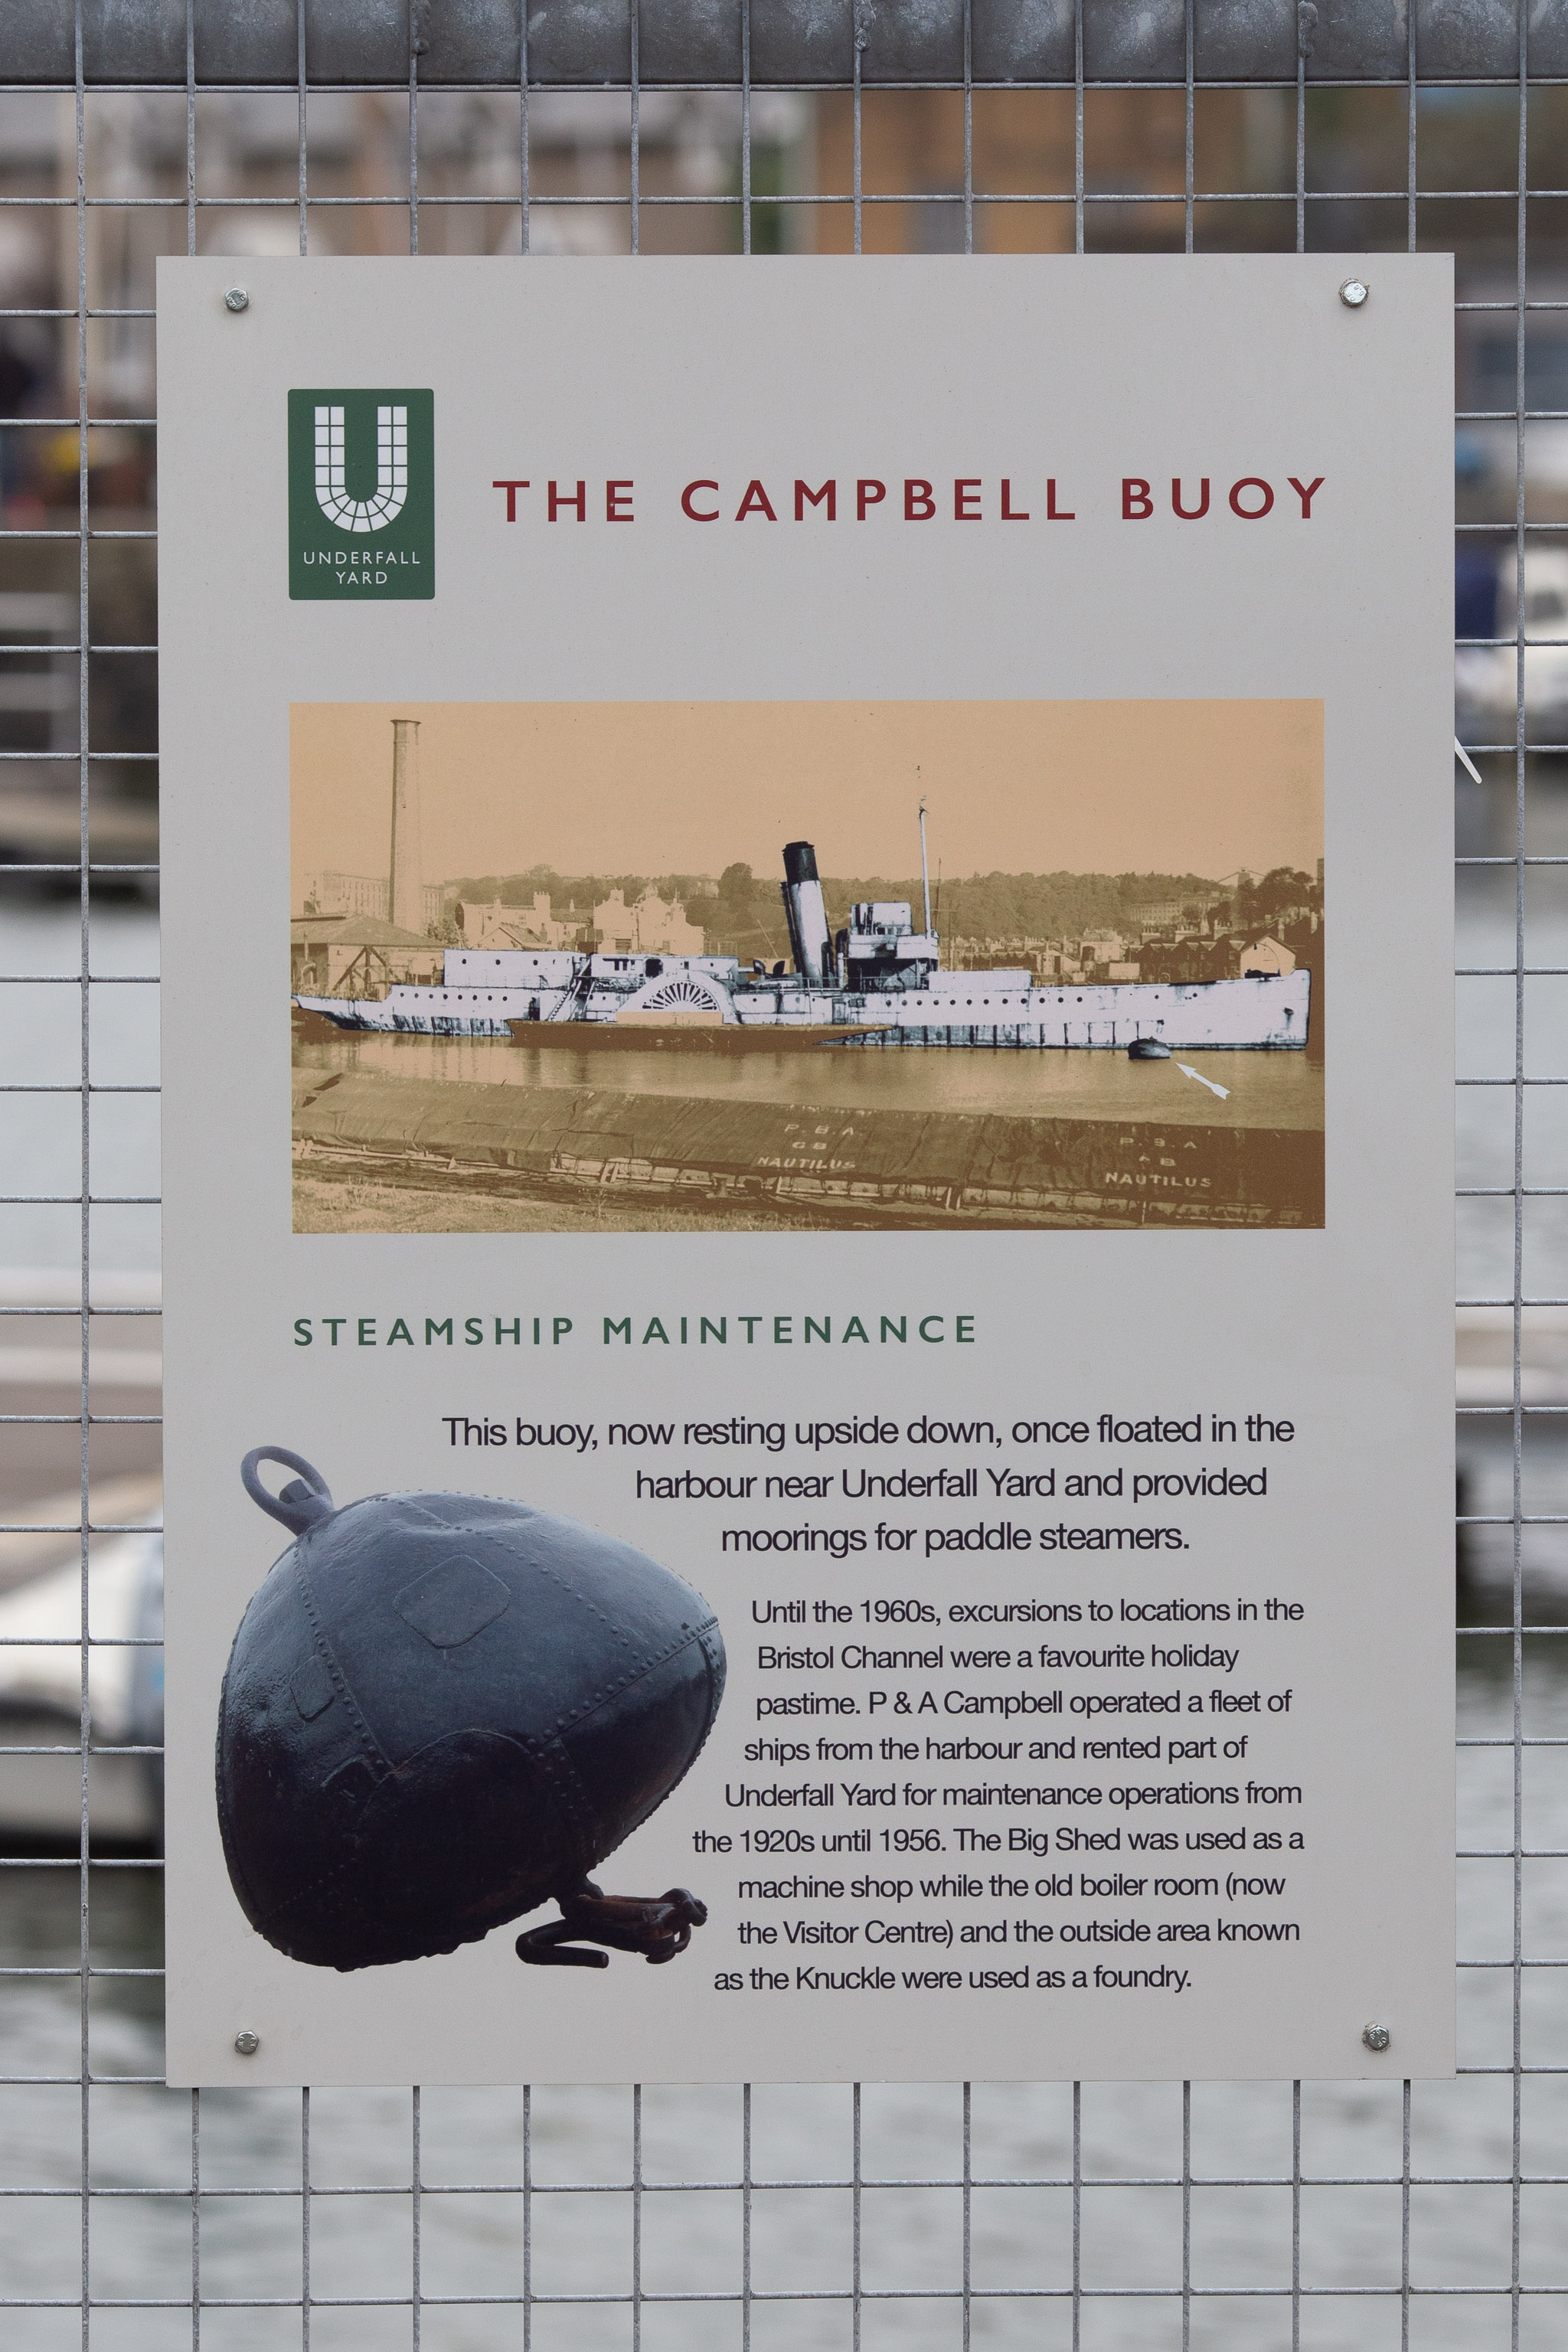 The Campbell Buoy
